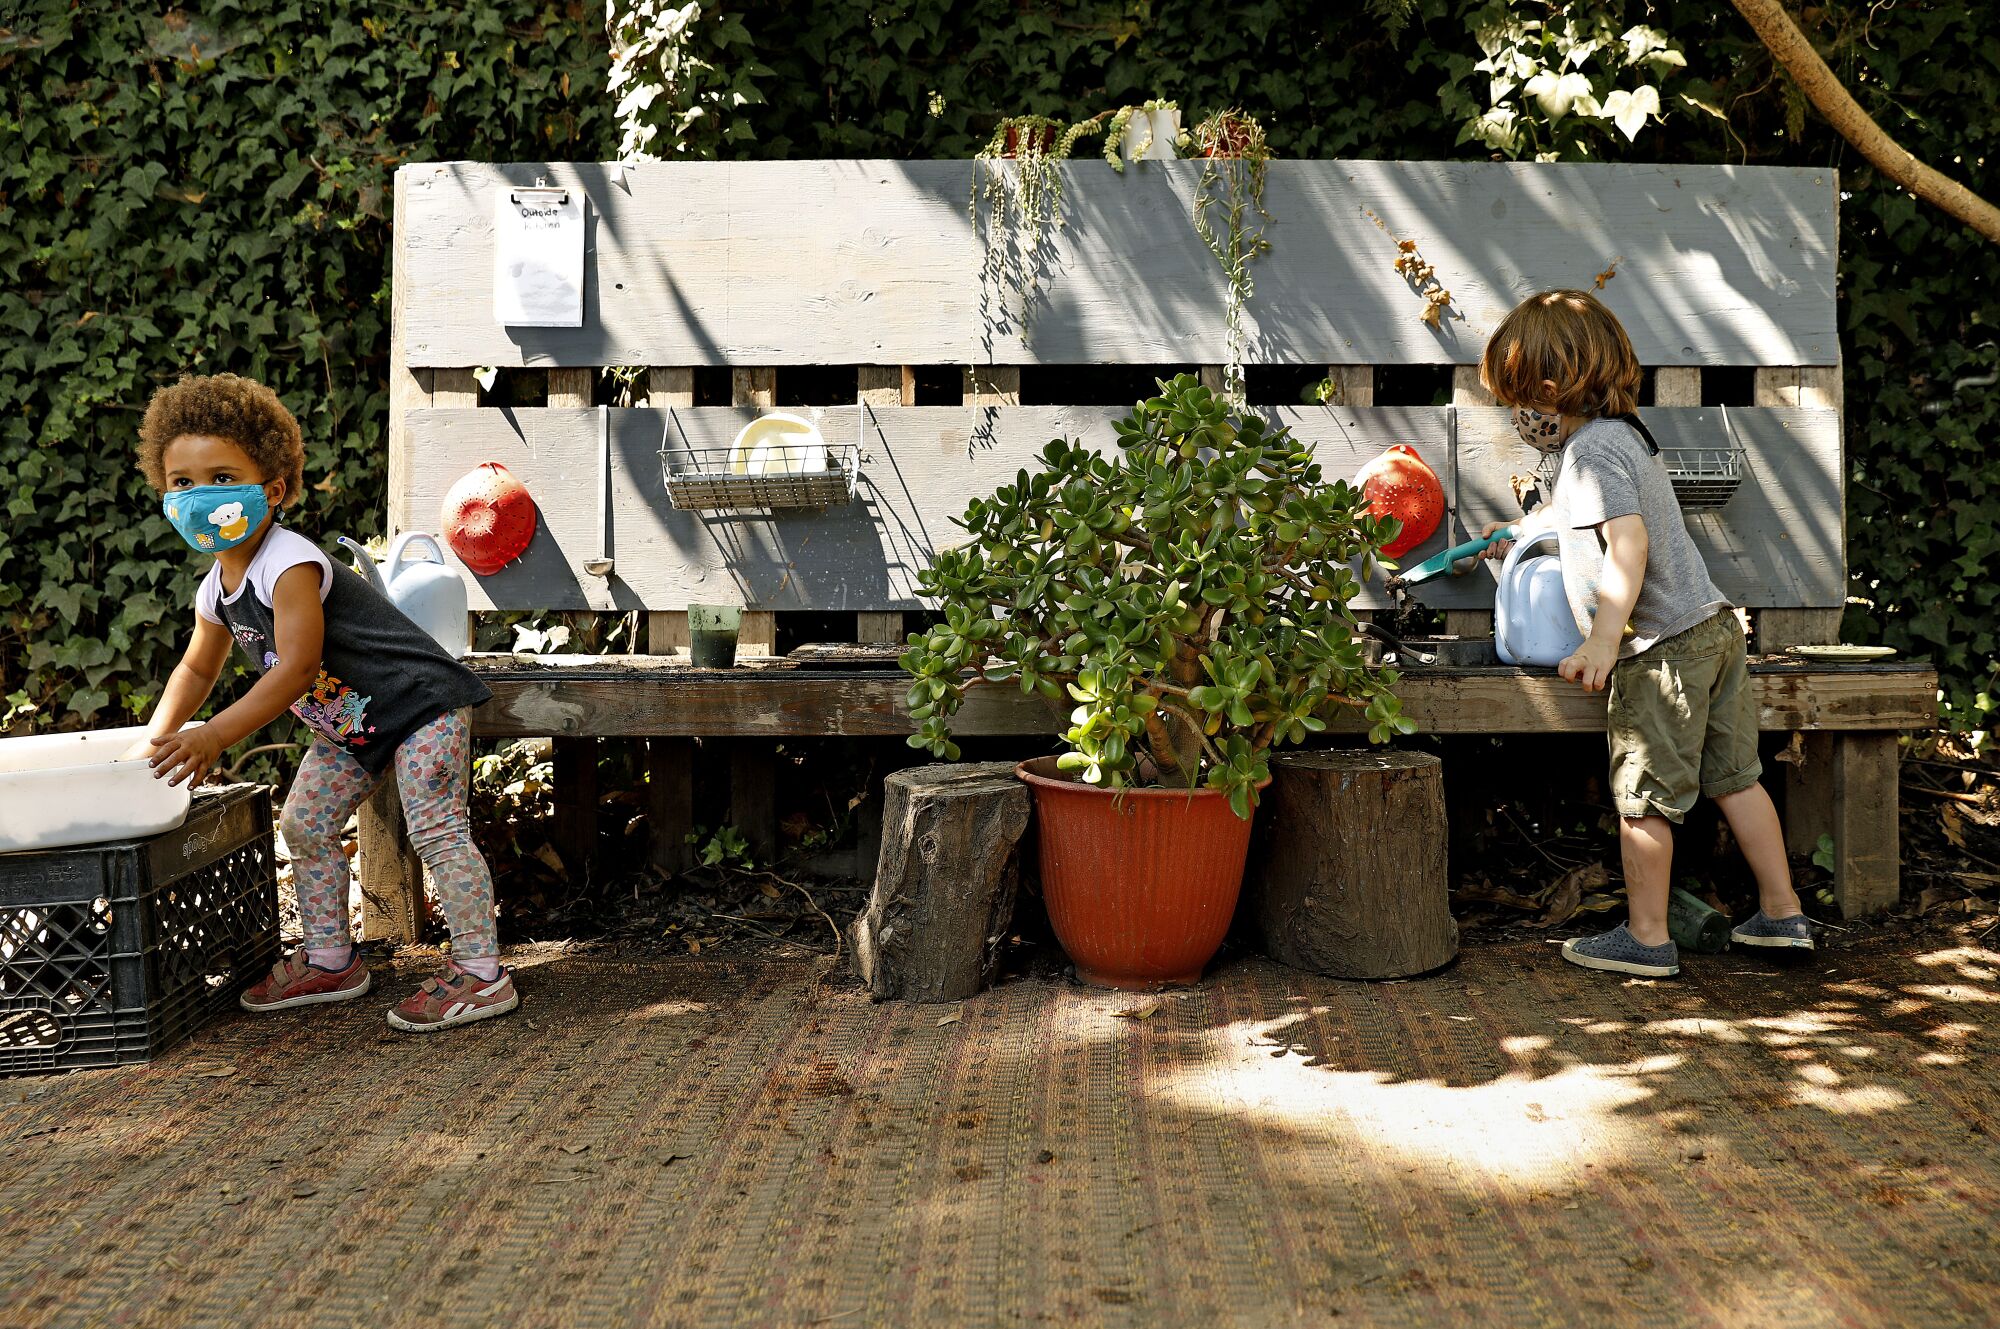 Children socially distance while playing in an outdoor kitchen at Voyages Preschool.